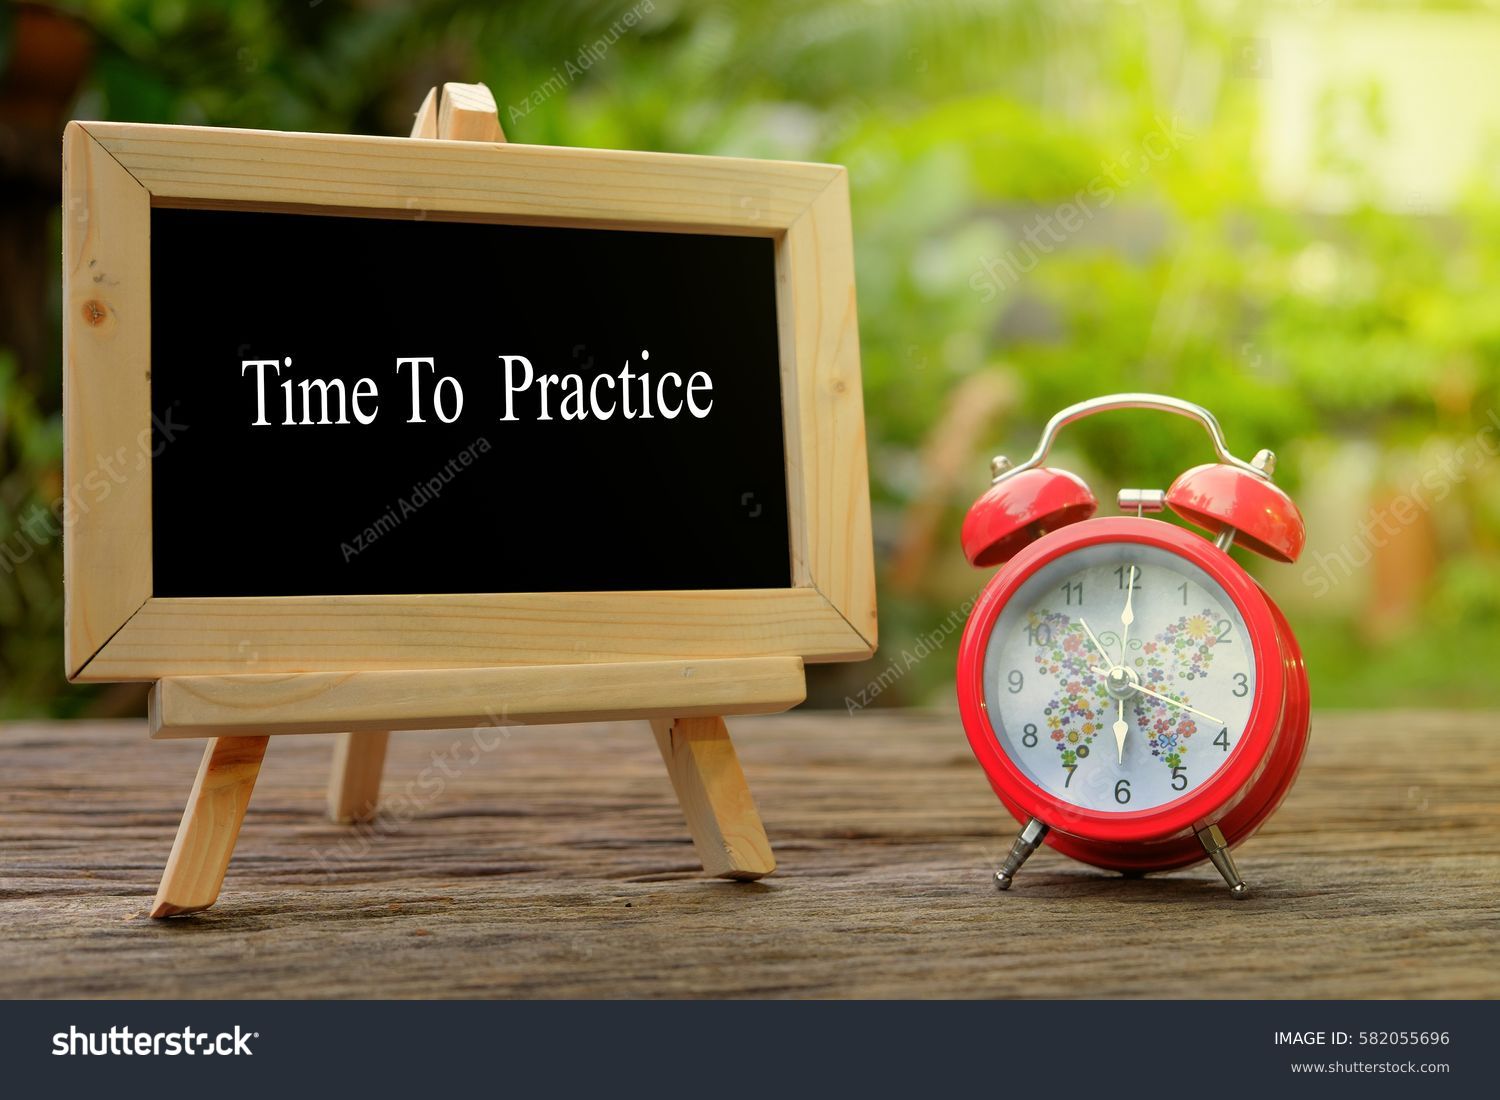 TIME TO PRACTICE! inscription written on chalkboard and red alarm clock on  old wooden desk . Time concept. #582055696